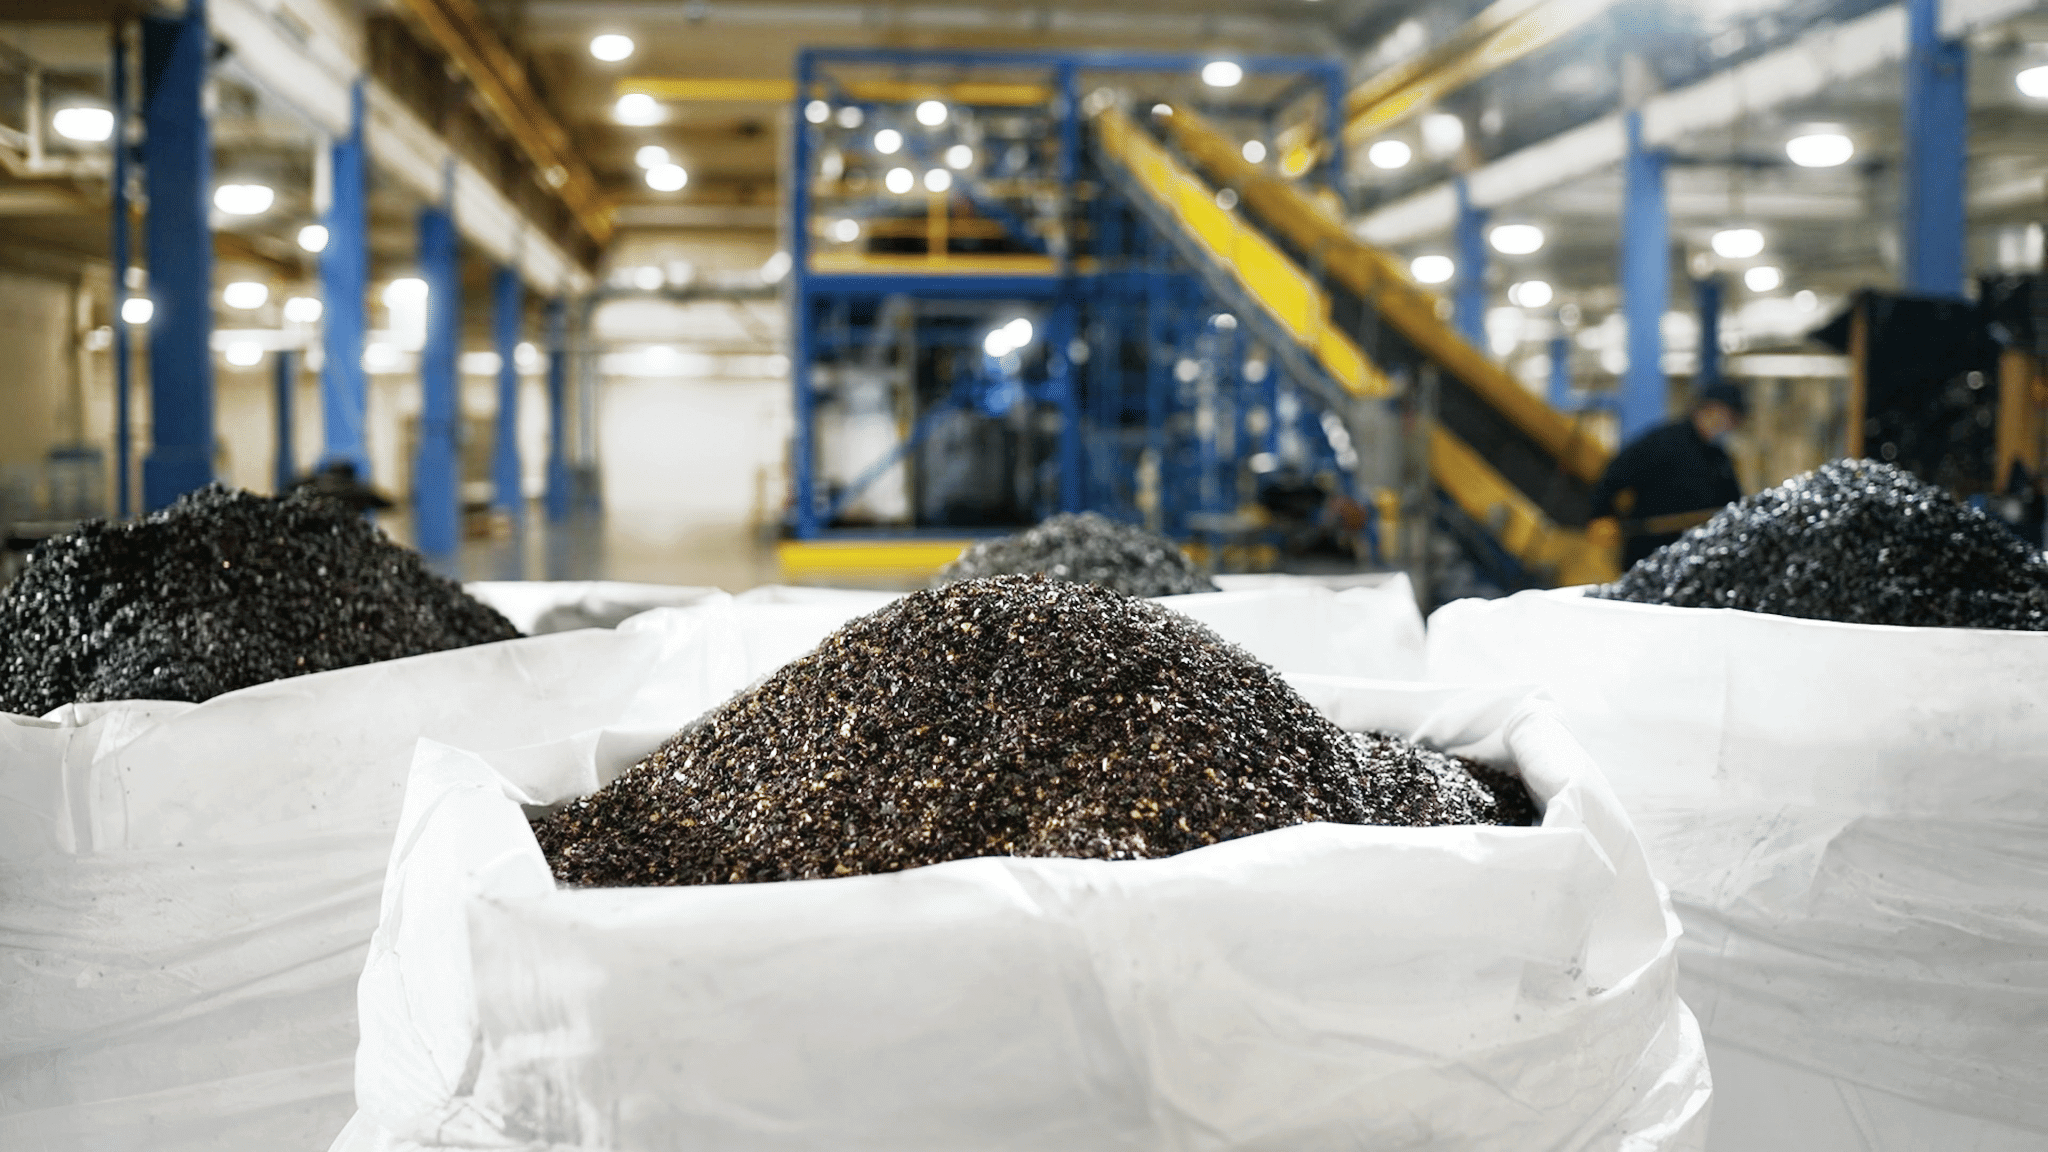 Three bags of black powder (black mass) at the forefront of the image. Conveyor belt is in the background of the image.